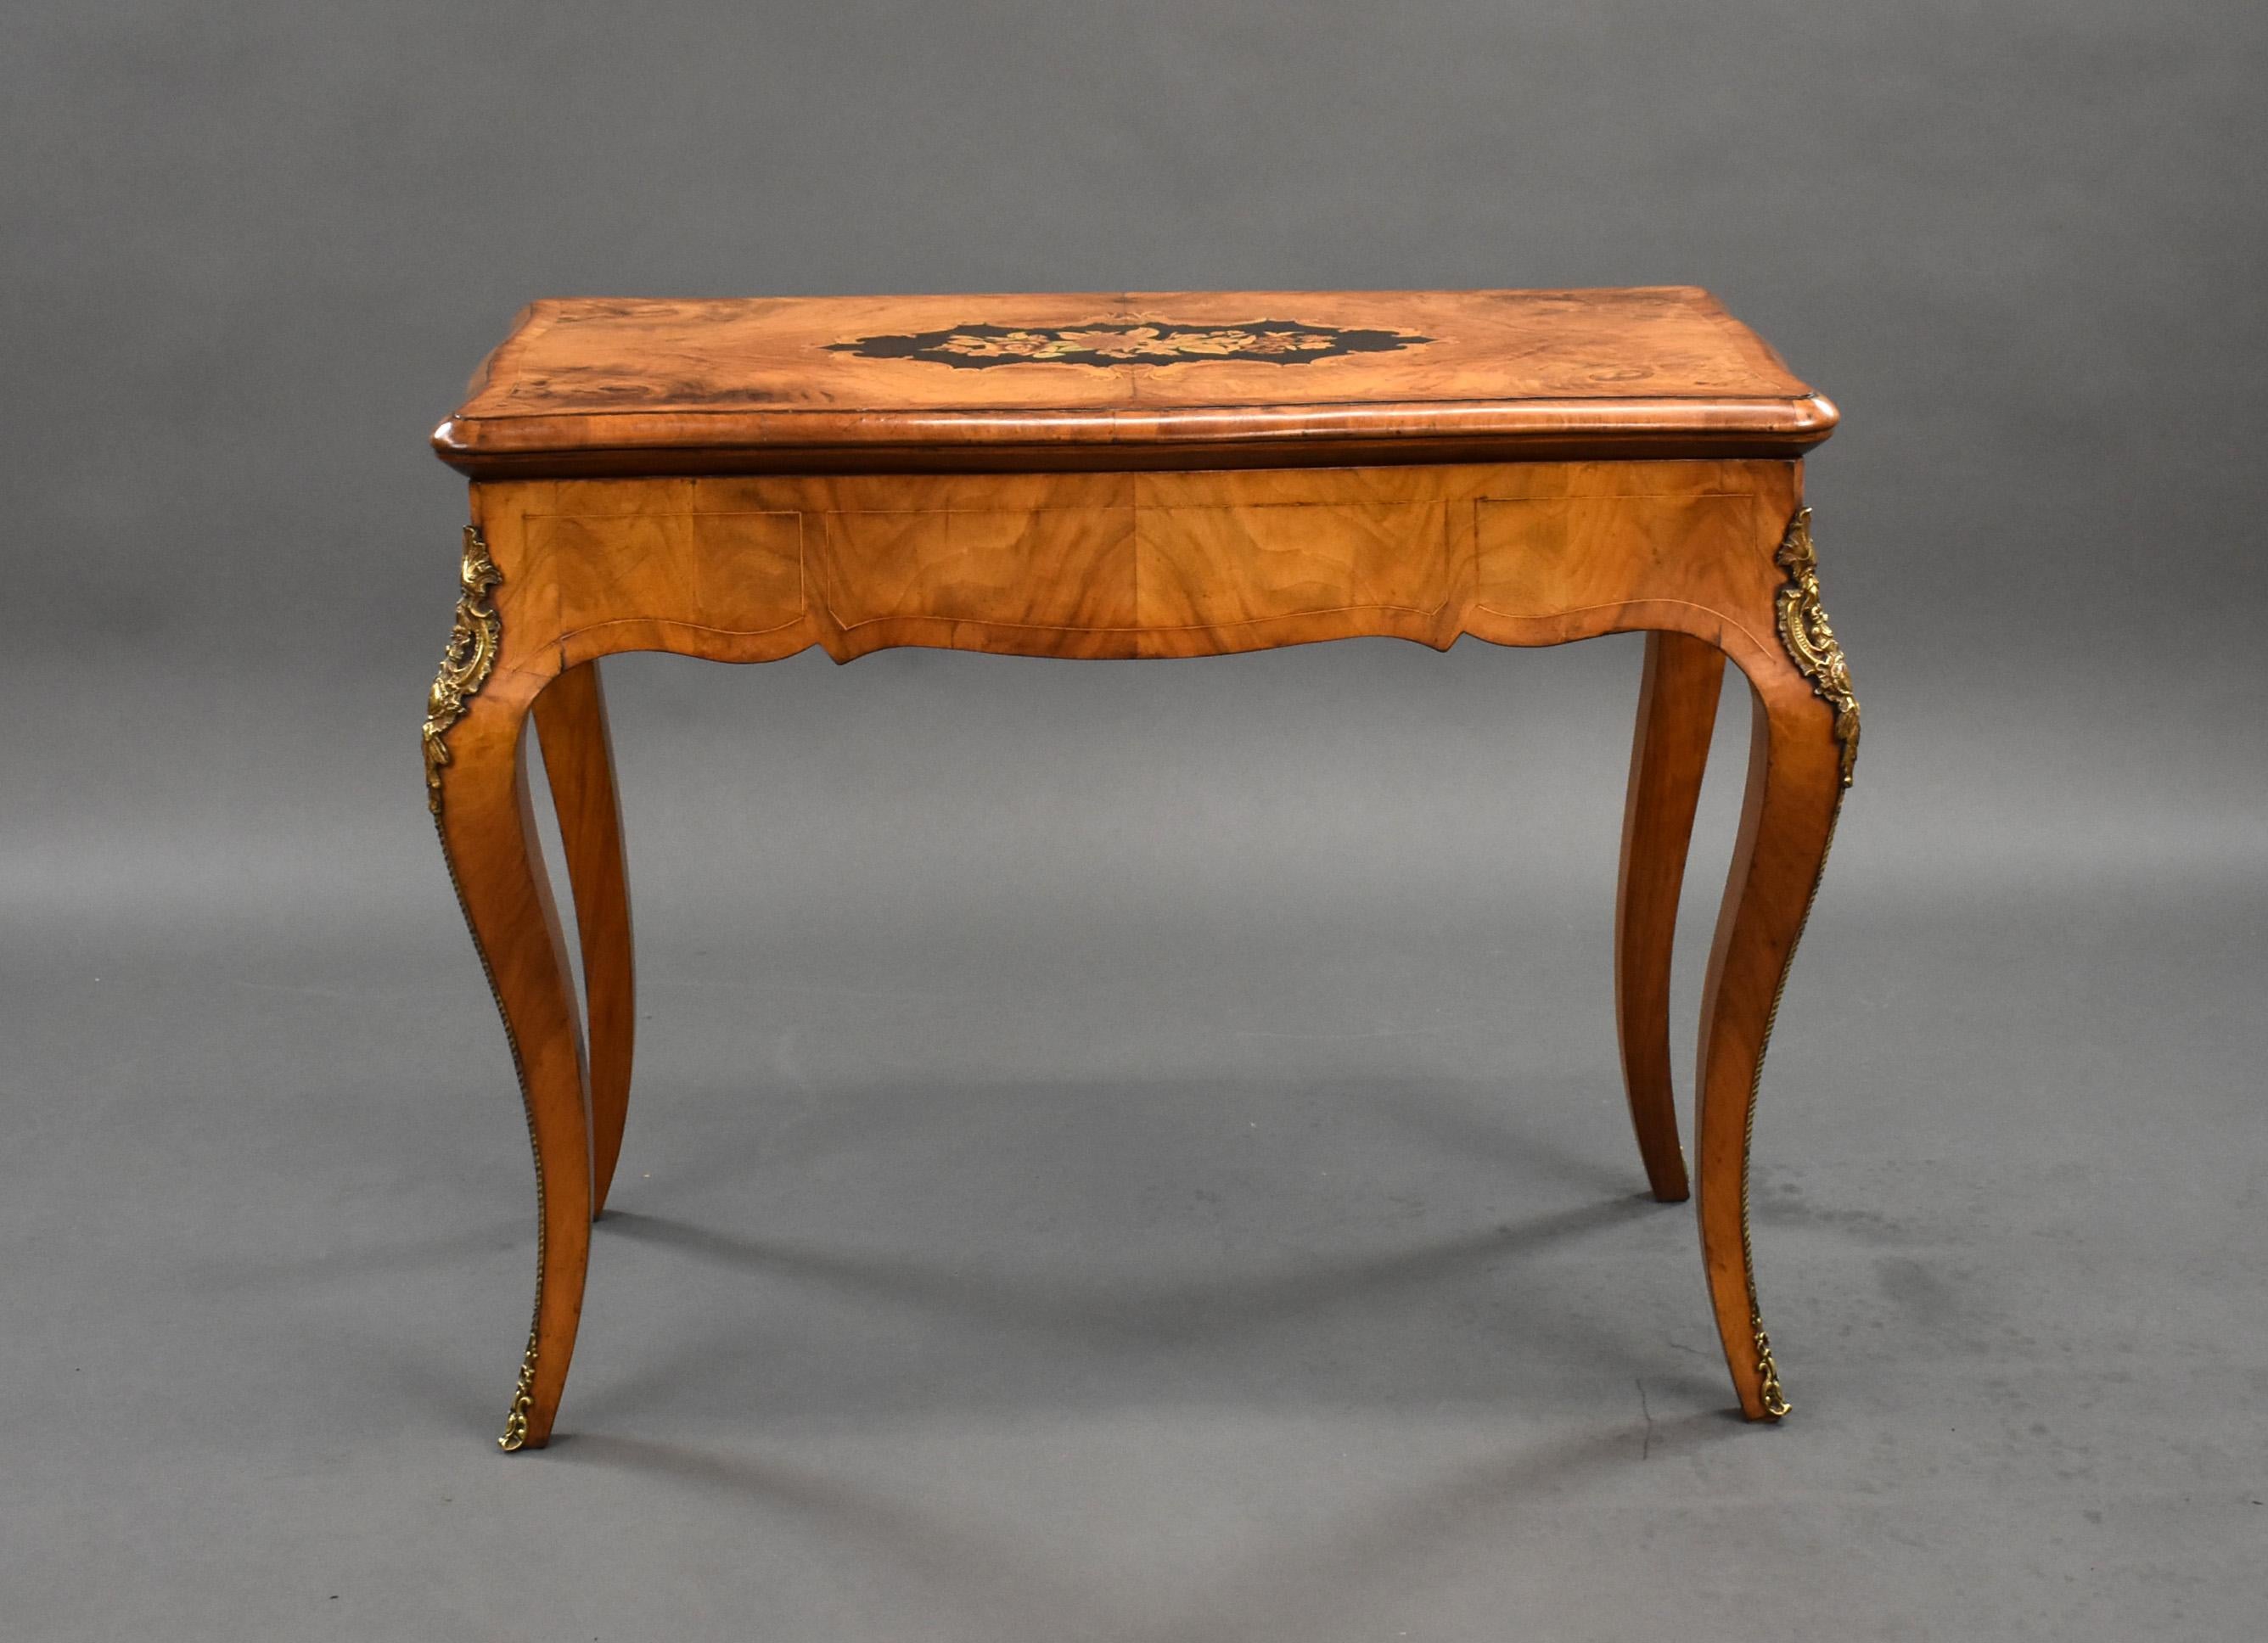 19th Century English Victorian Burl Walnut and Marquetry Inlaid Card Table In Good Condition For Sale In Chelmsford, Essex